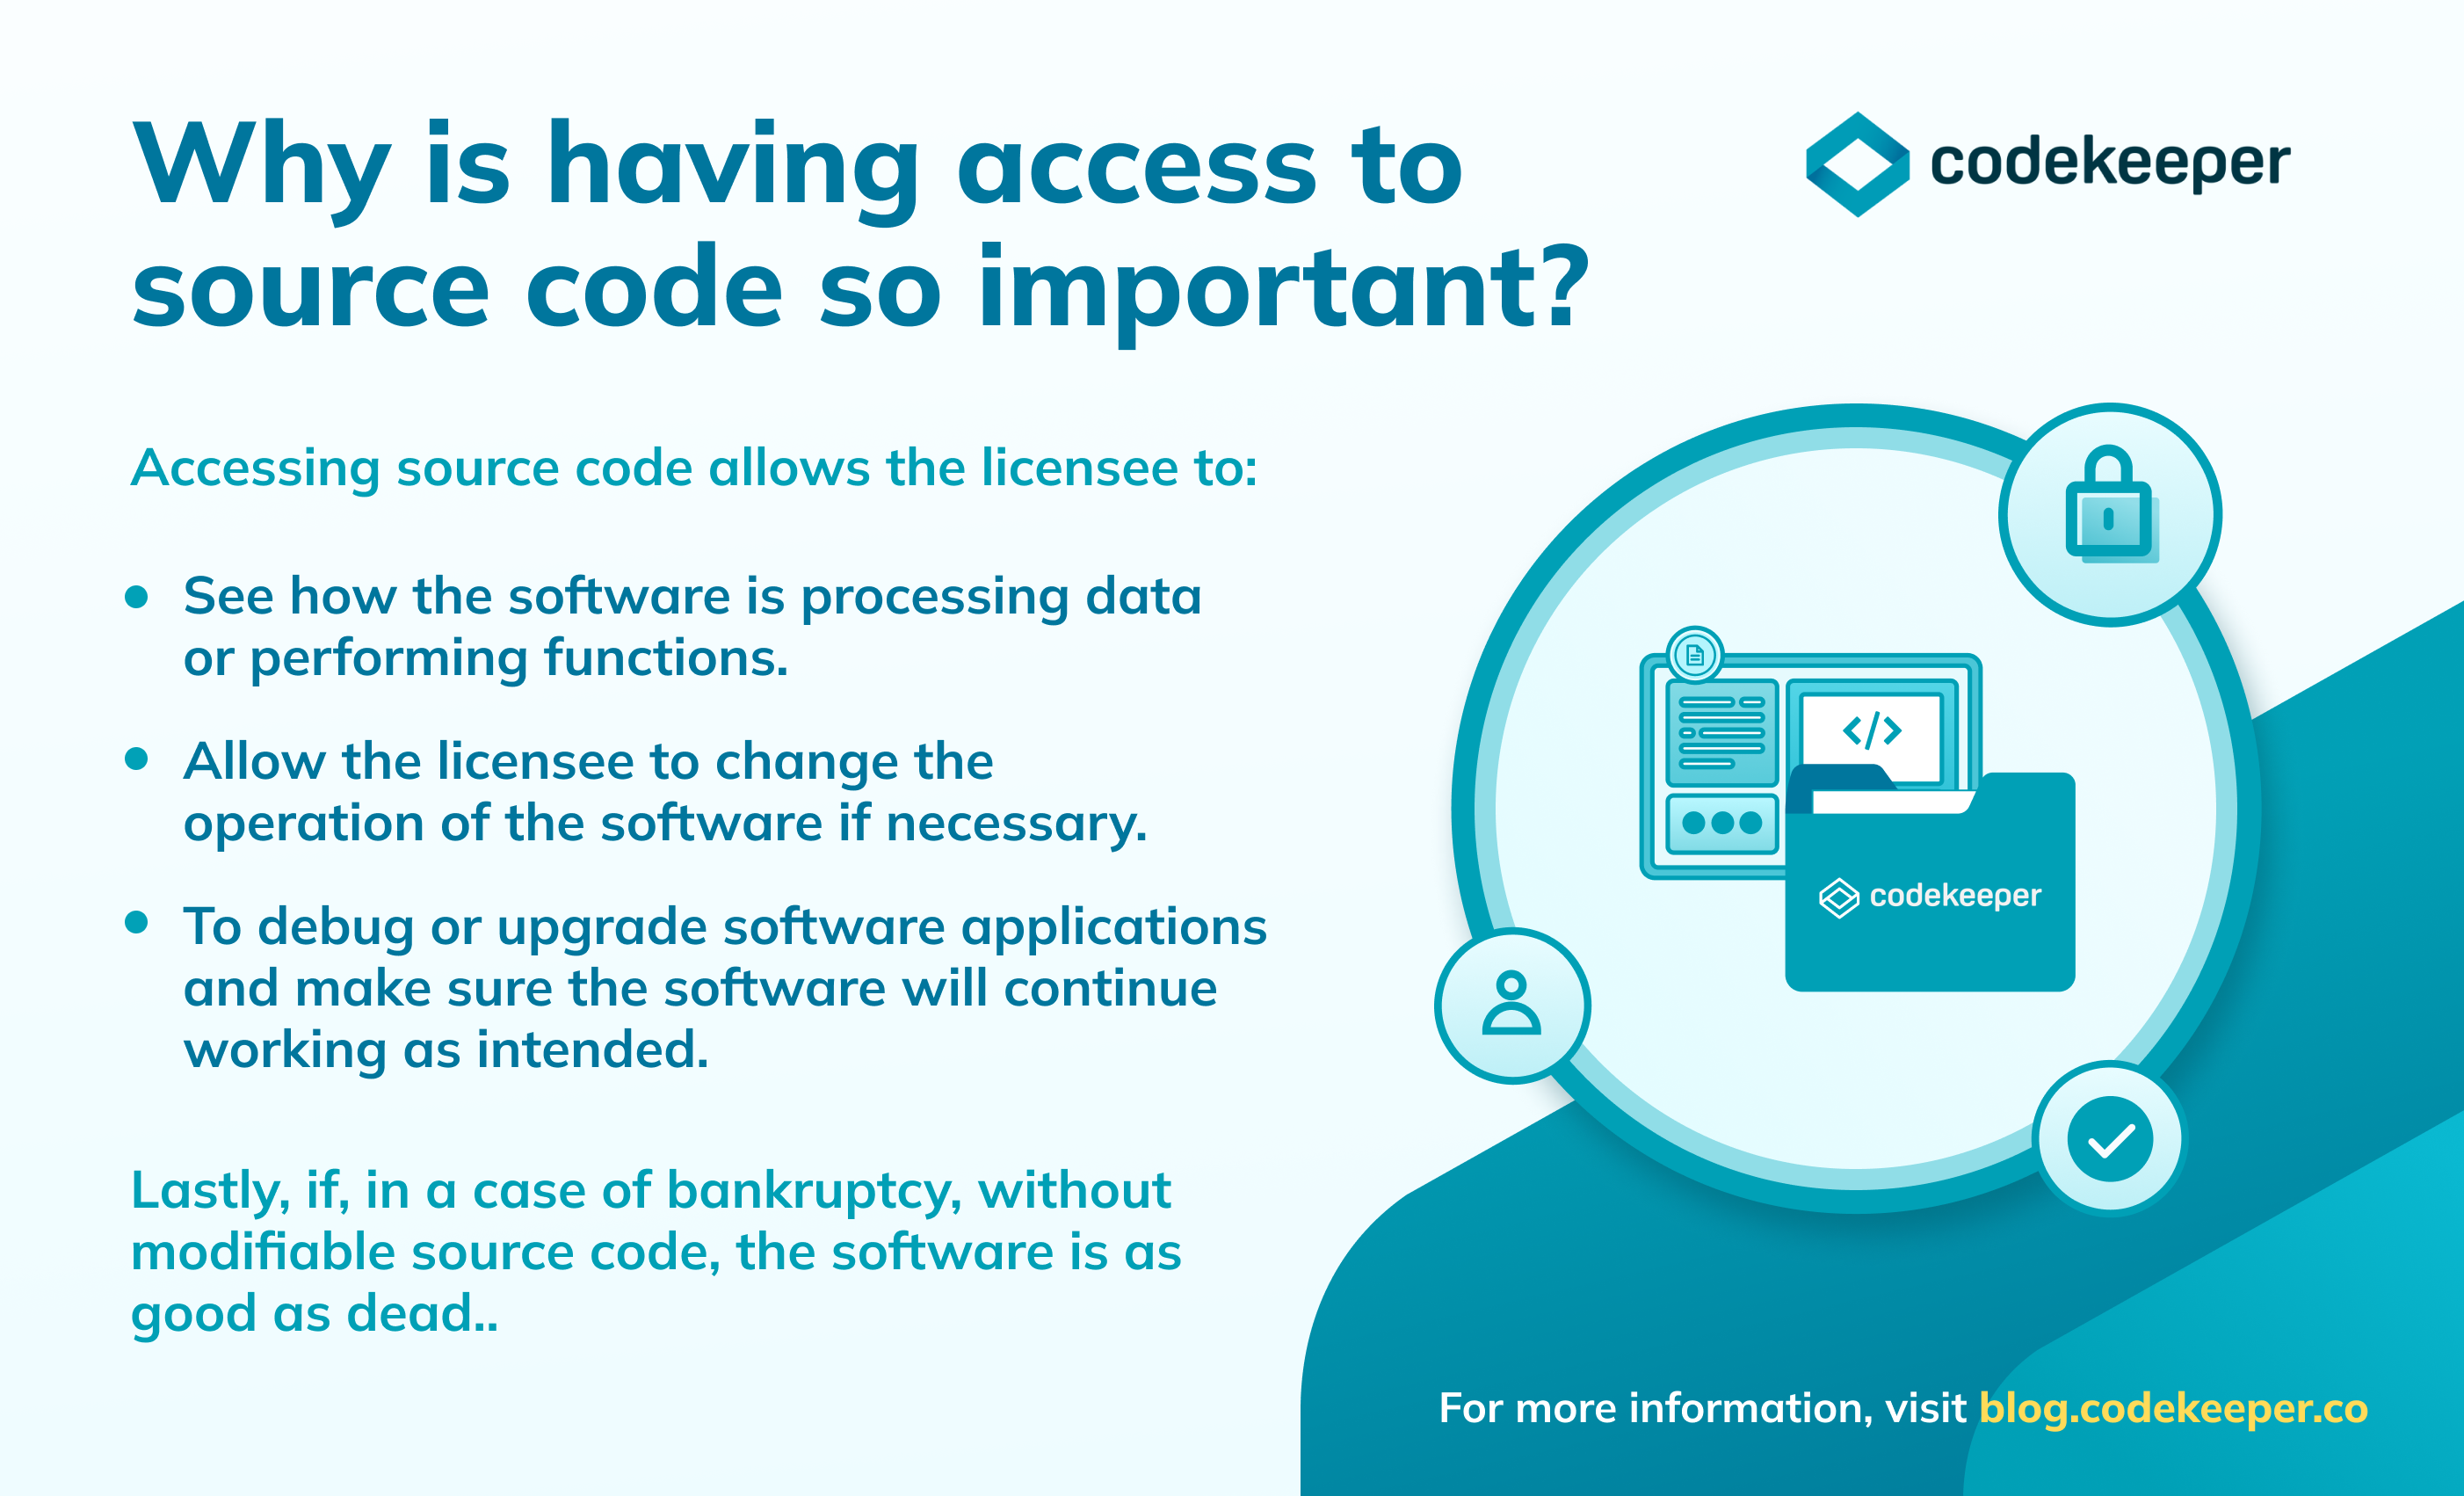 Codekeeper why is having access to source code so important?